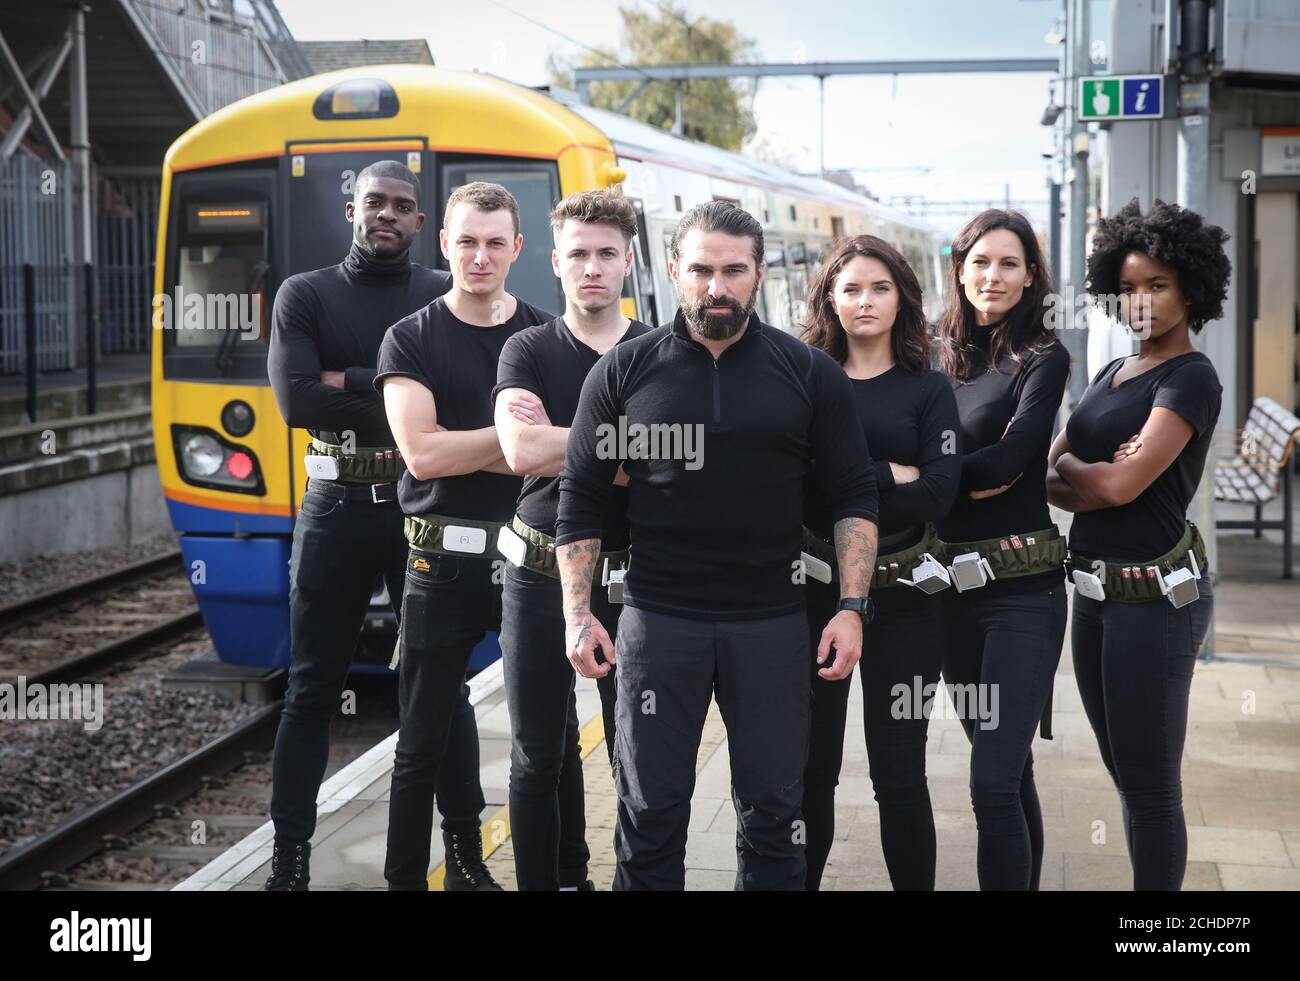 TV presenter and former SAS soldier Ant Middleton leads the Argos Wi-Fi army, who will be deployed on trains across the UK to combat poor connectivity for commuters trying to shop online for deals this Black Friday. Stock Photo